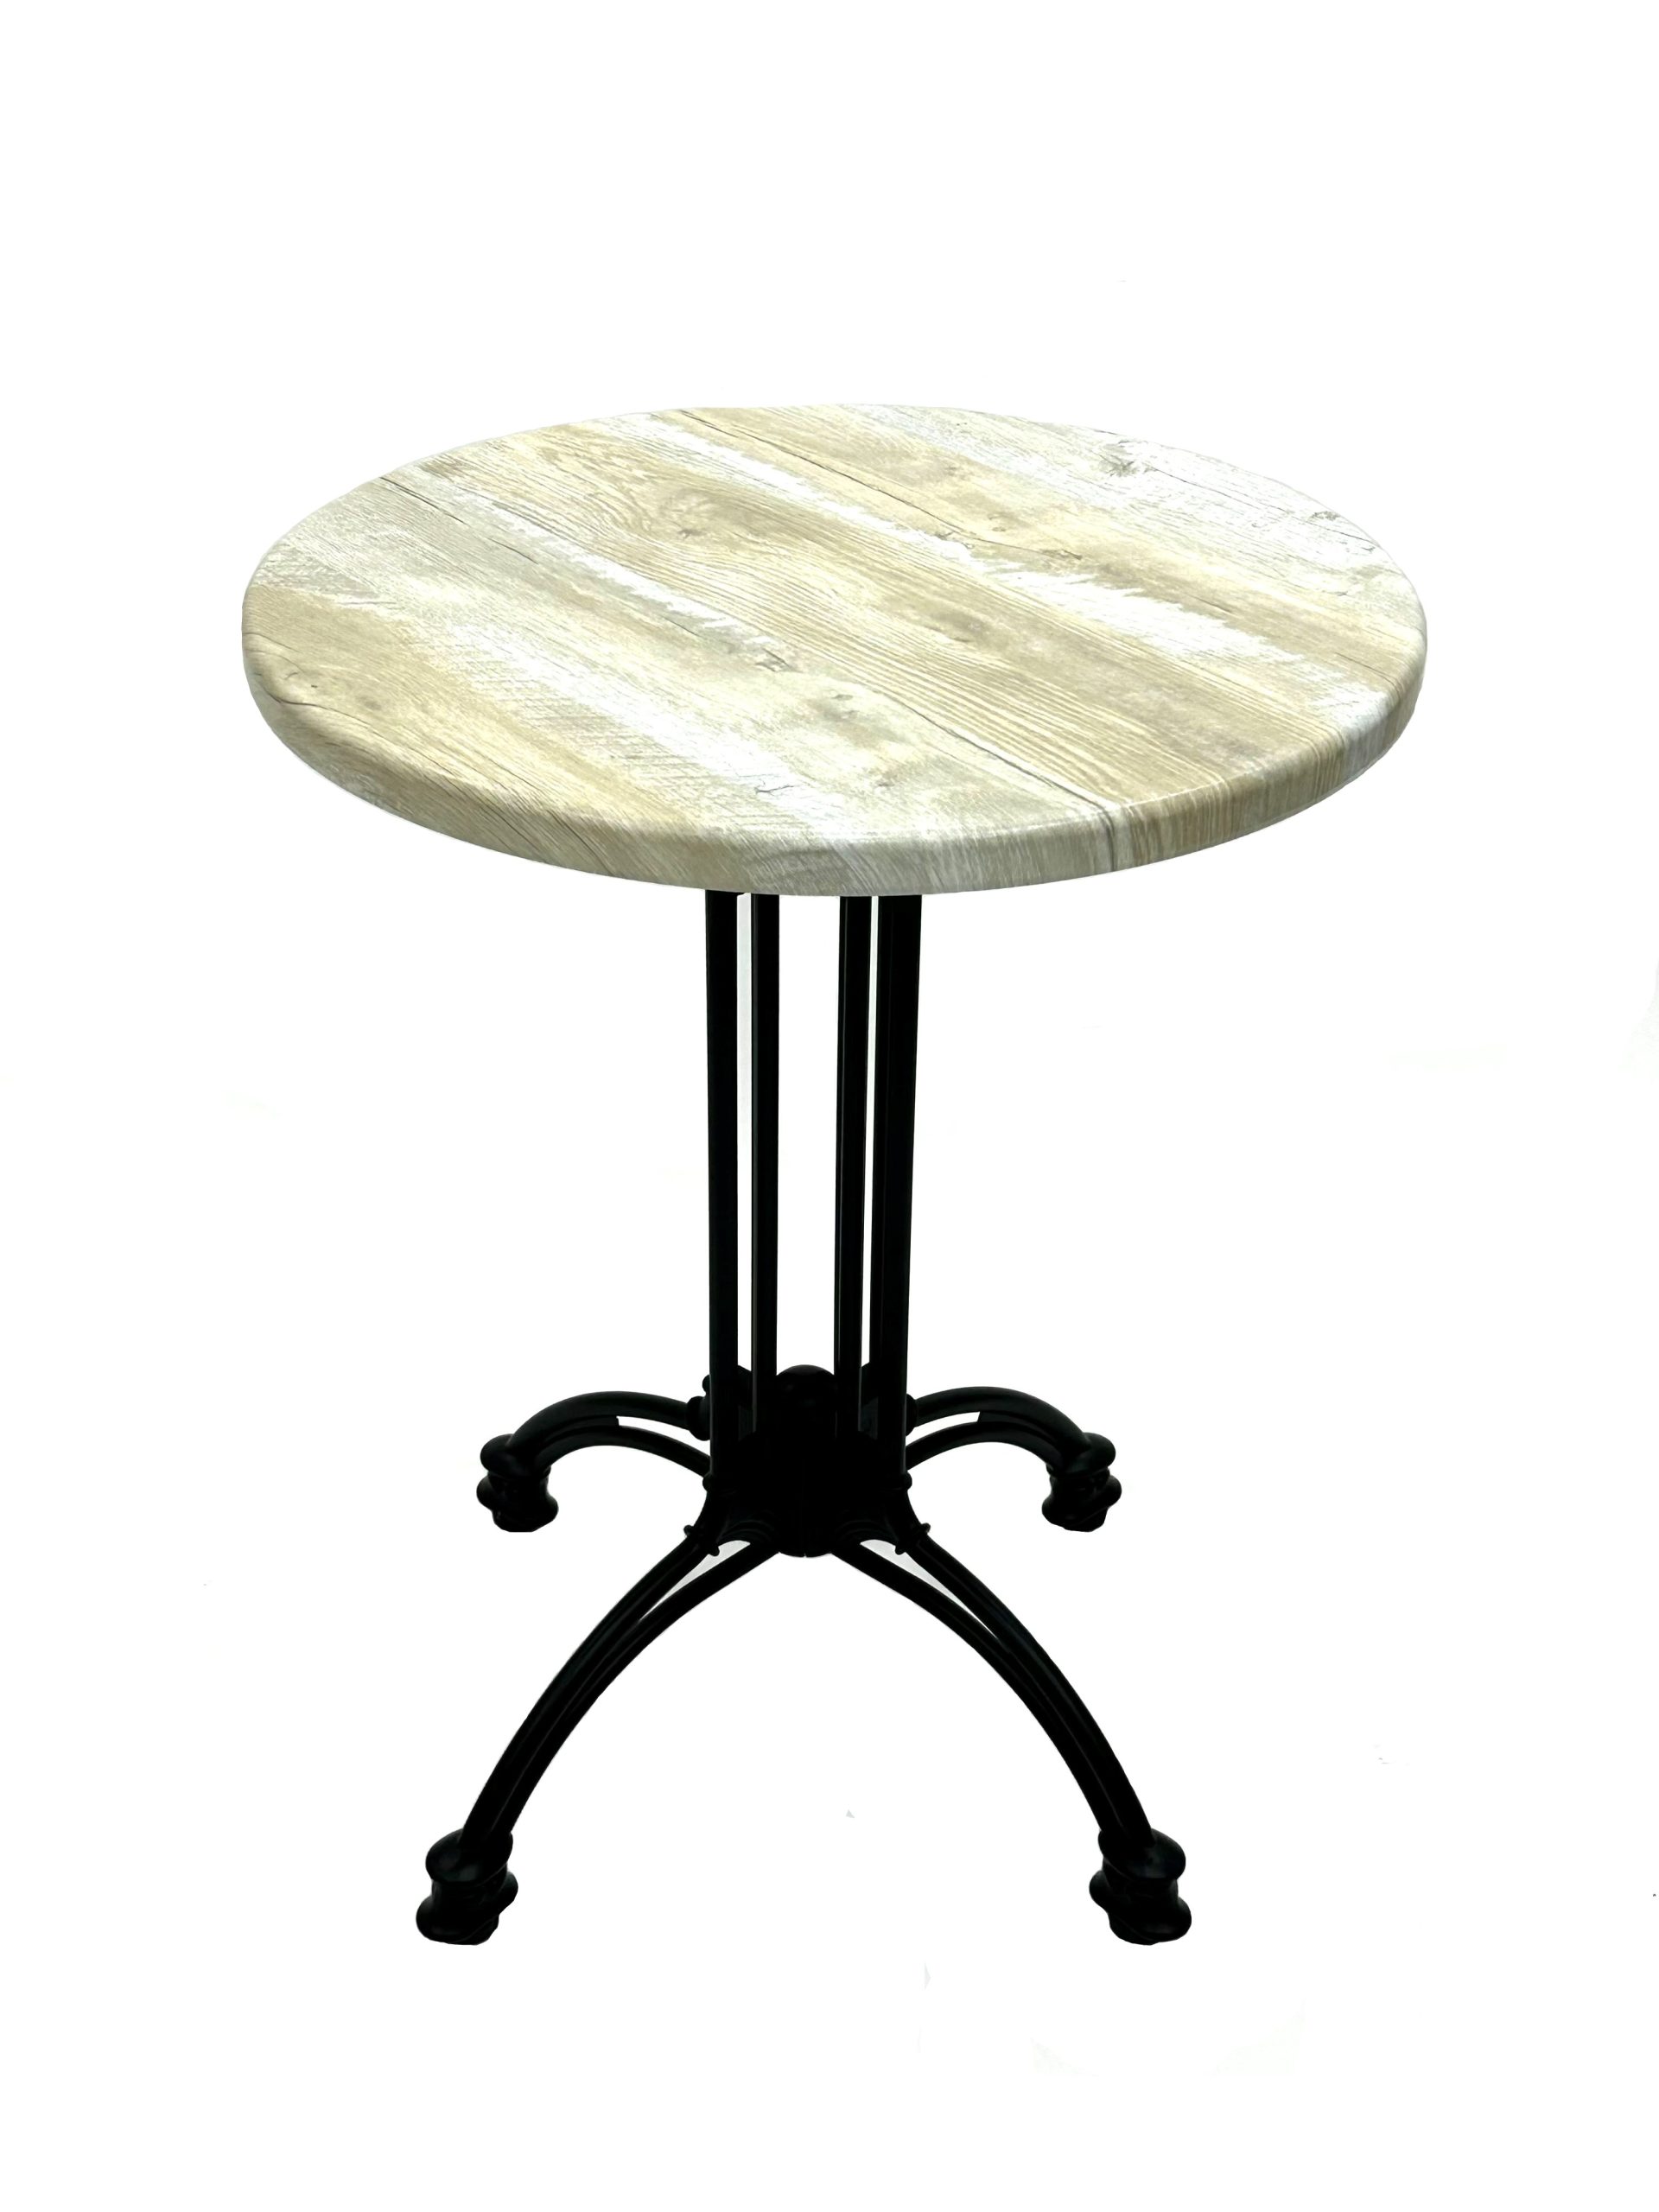 UK Suppliers Of High Quality Mugello Bistro Tables